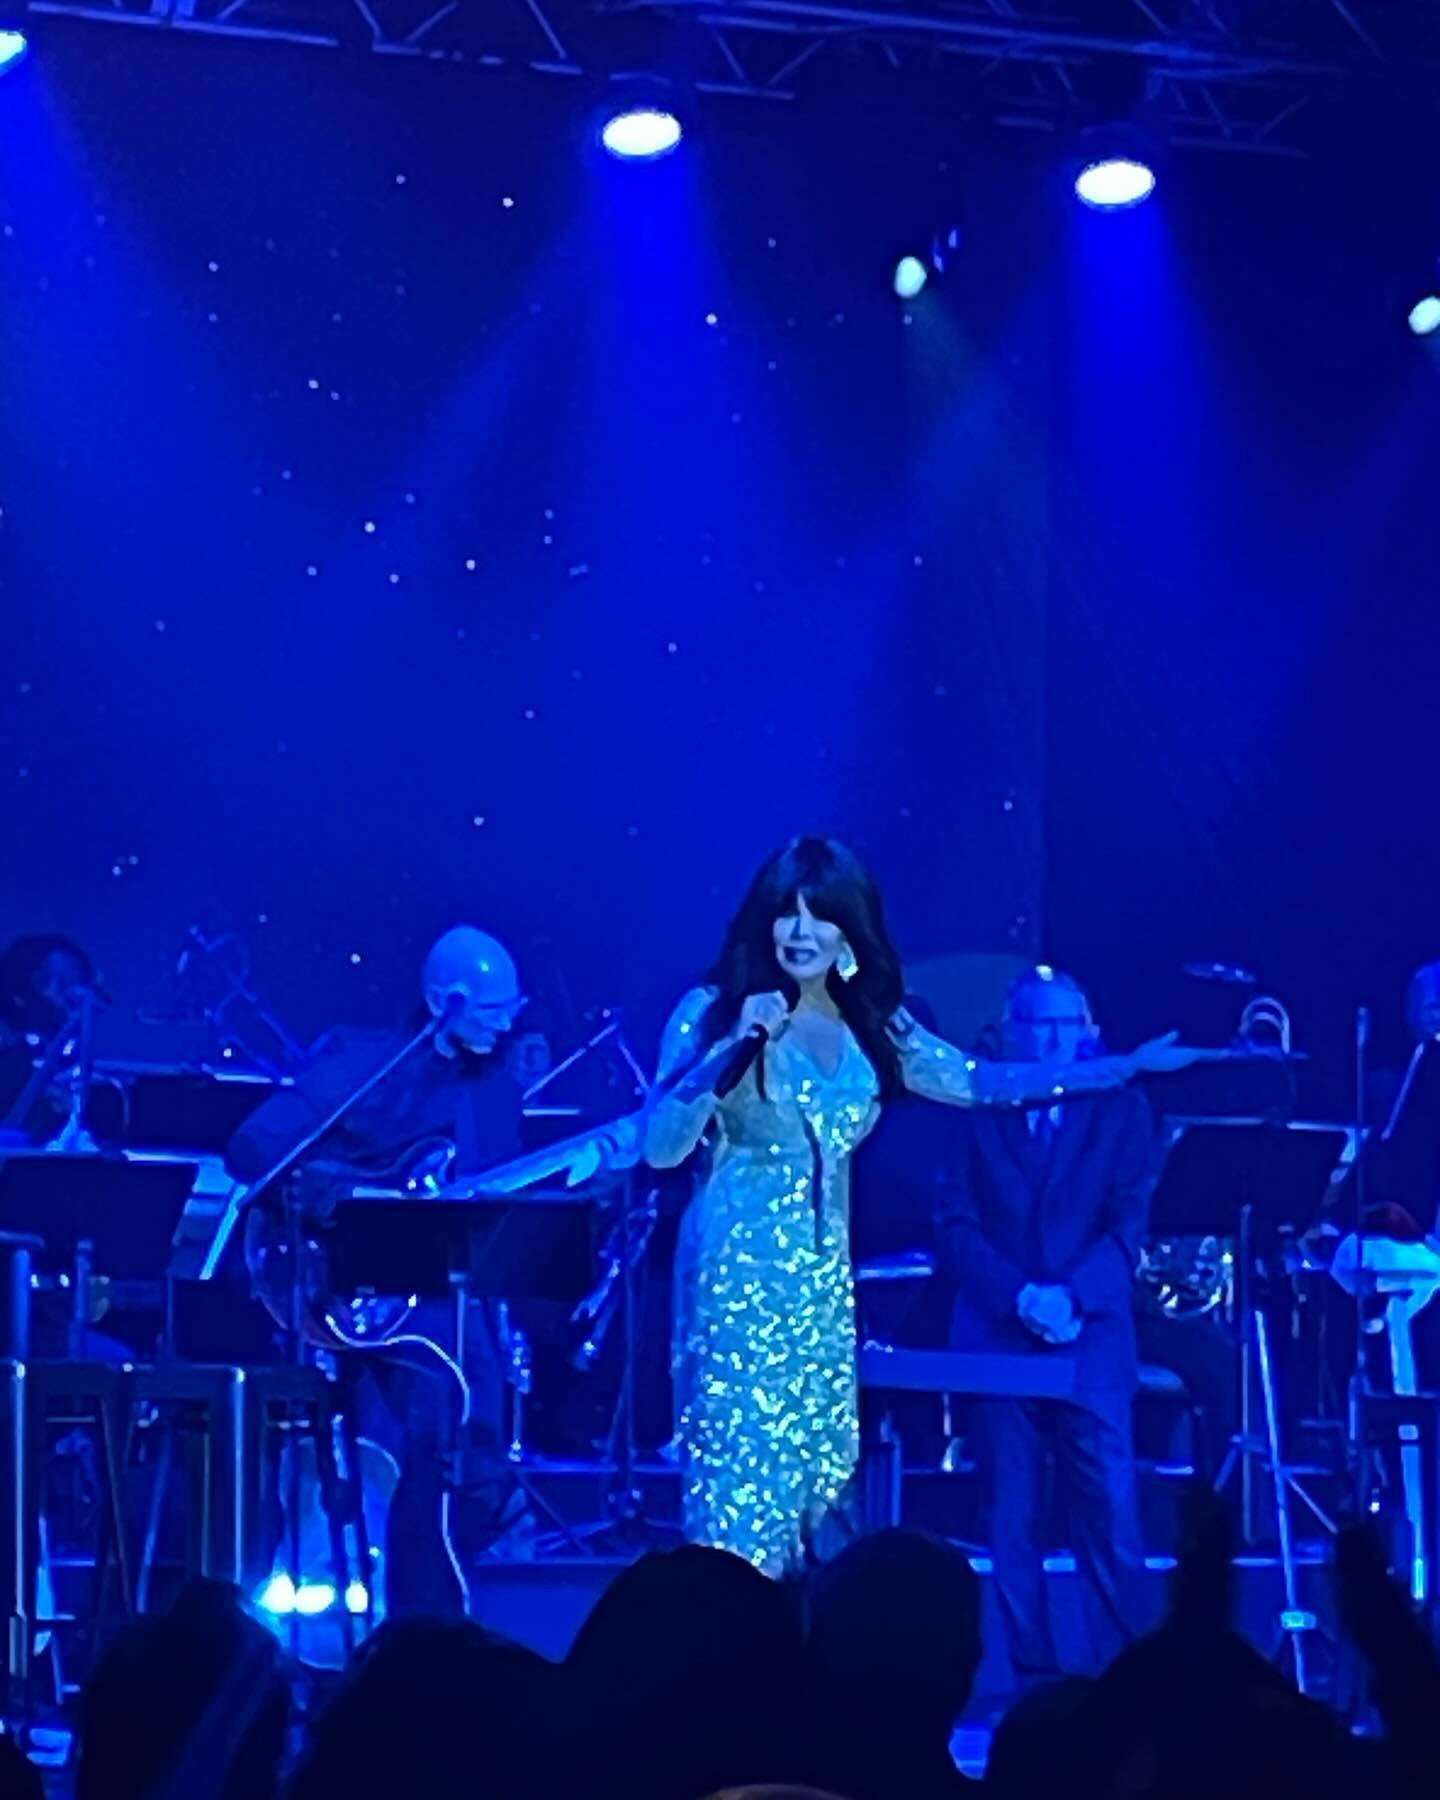 I took my Mom tonight to see @marieosmond for her birthday and had so much fun!